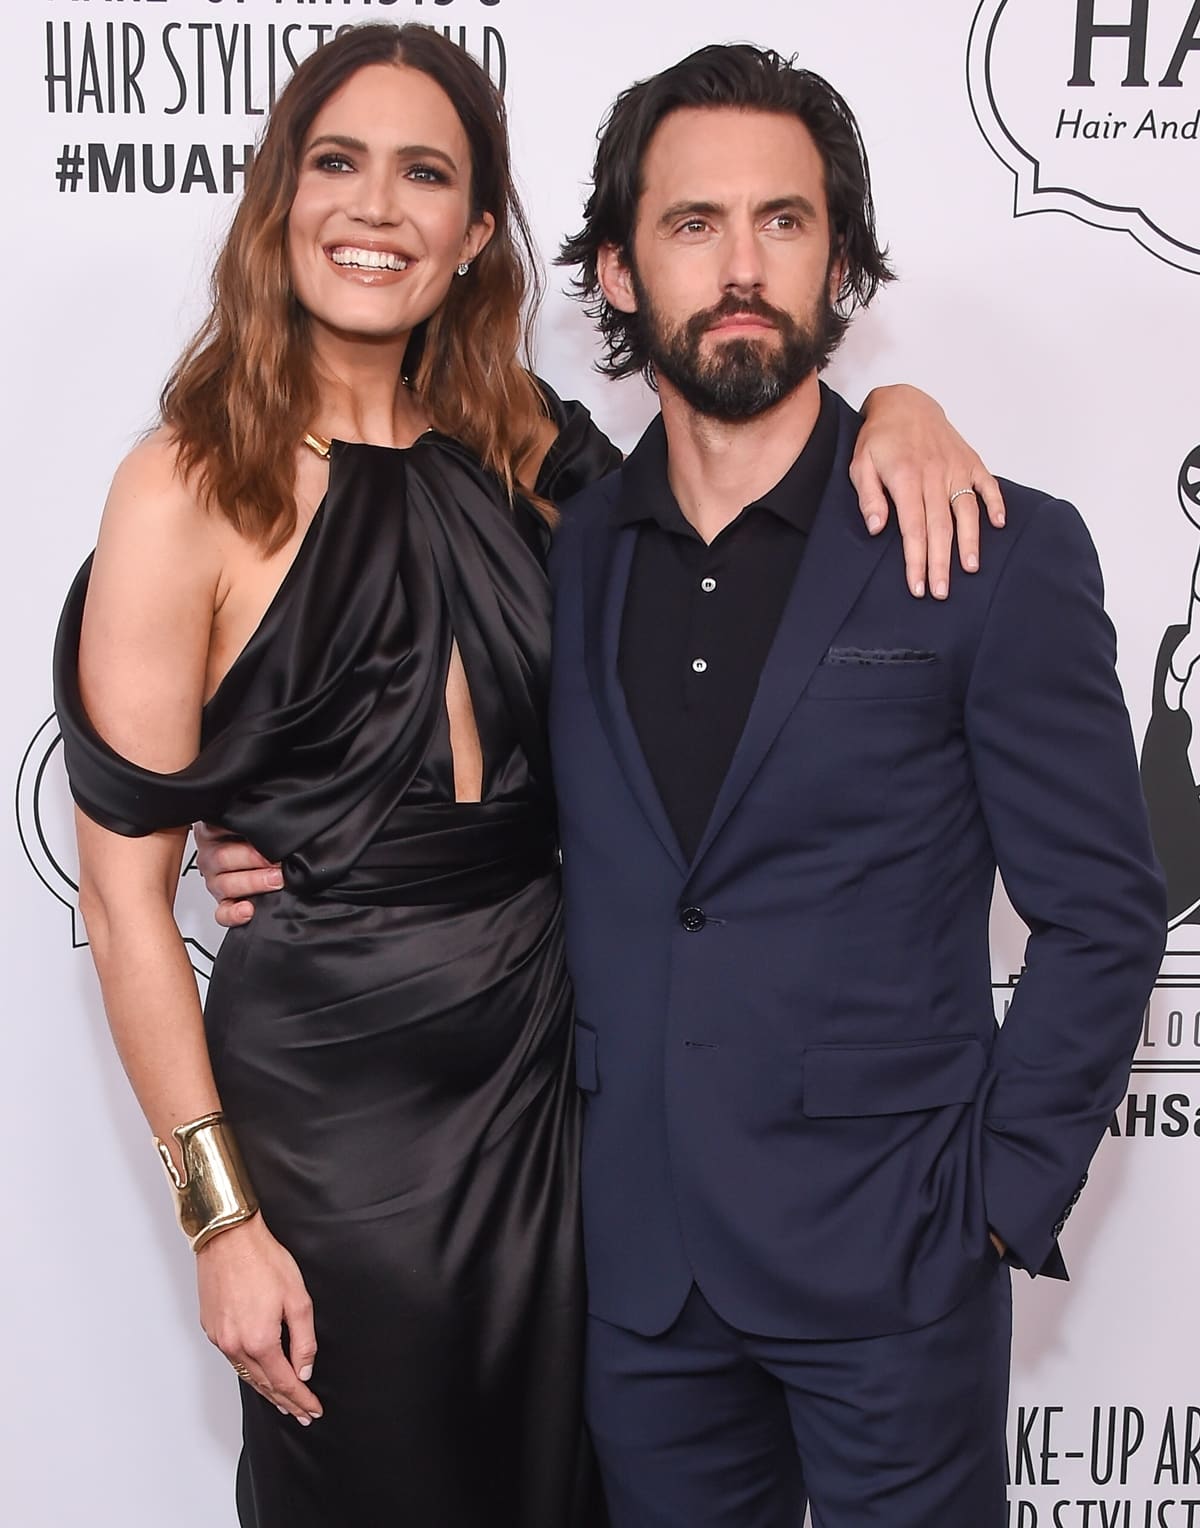 Milo Ventimiglia and Mandy Moore's on-screen chemistry in This Is Us is widely recognized as exceptional and Ventimiglia says that their close friendship and seamless communication on set made their job easier